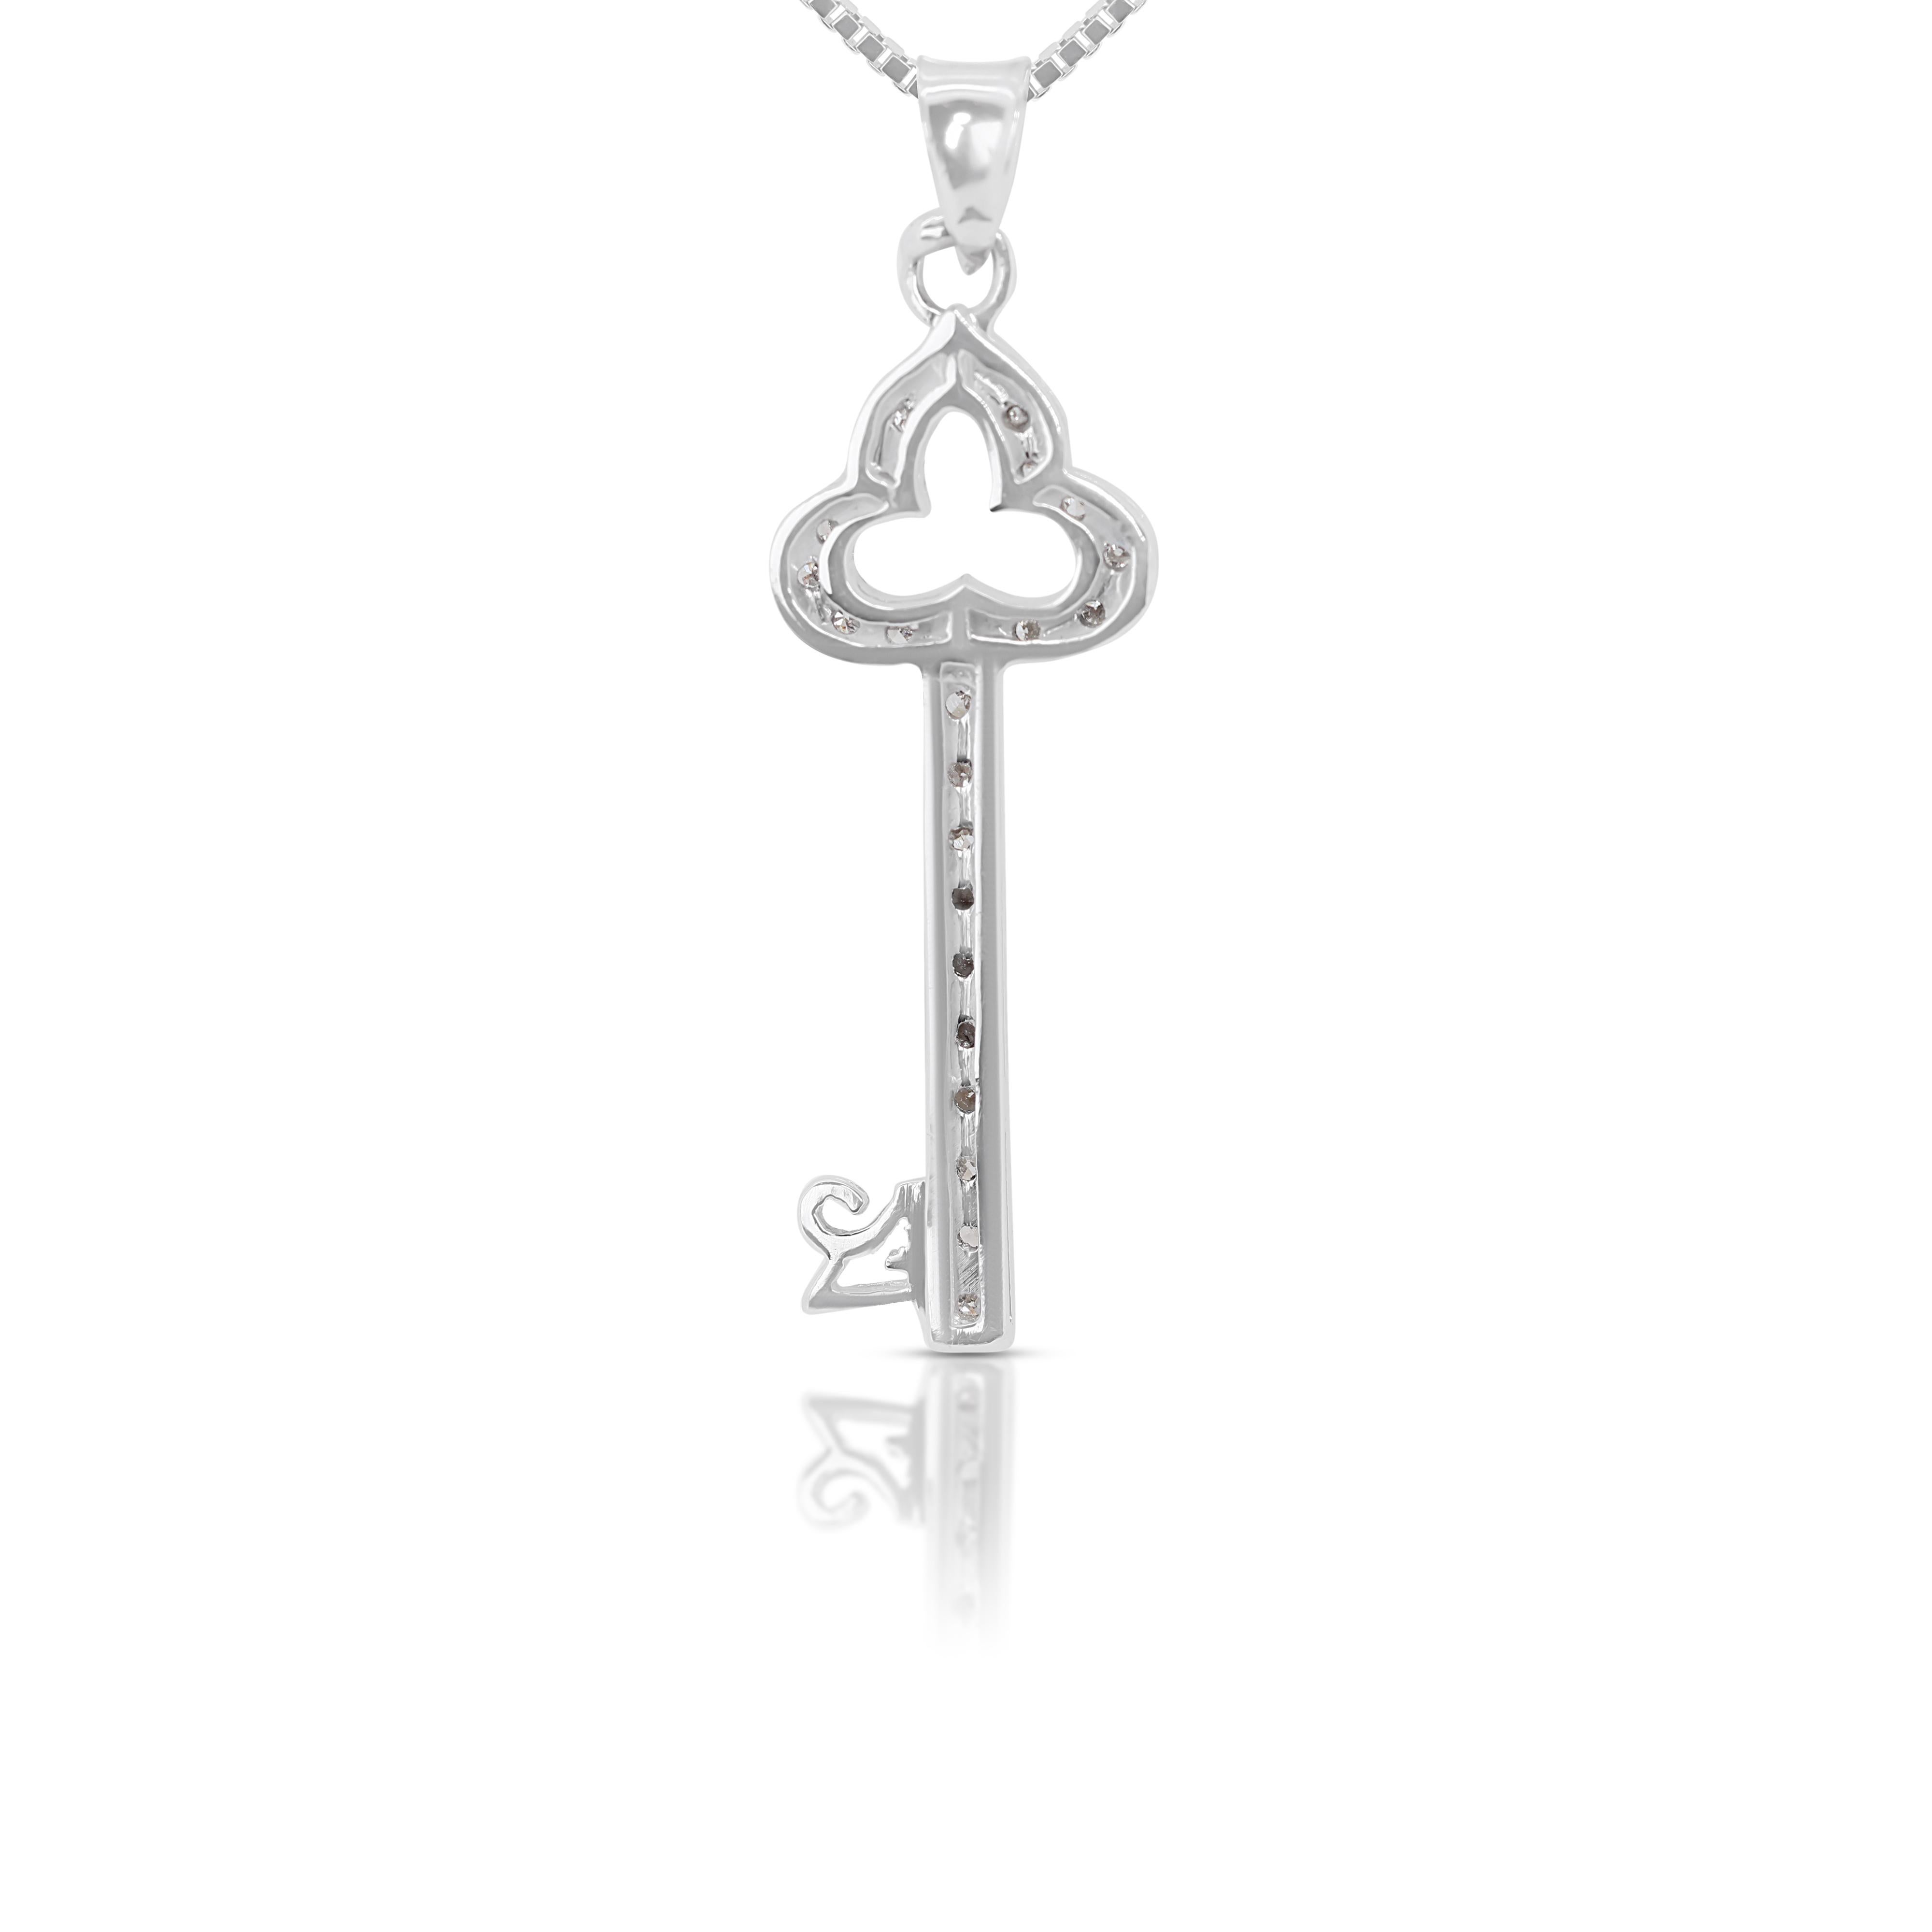 Lovely 0.23ct Diamonds Pendant in 9K White Gold (Chain not Included) For Sale 1